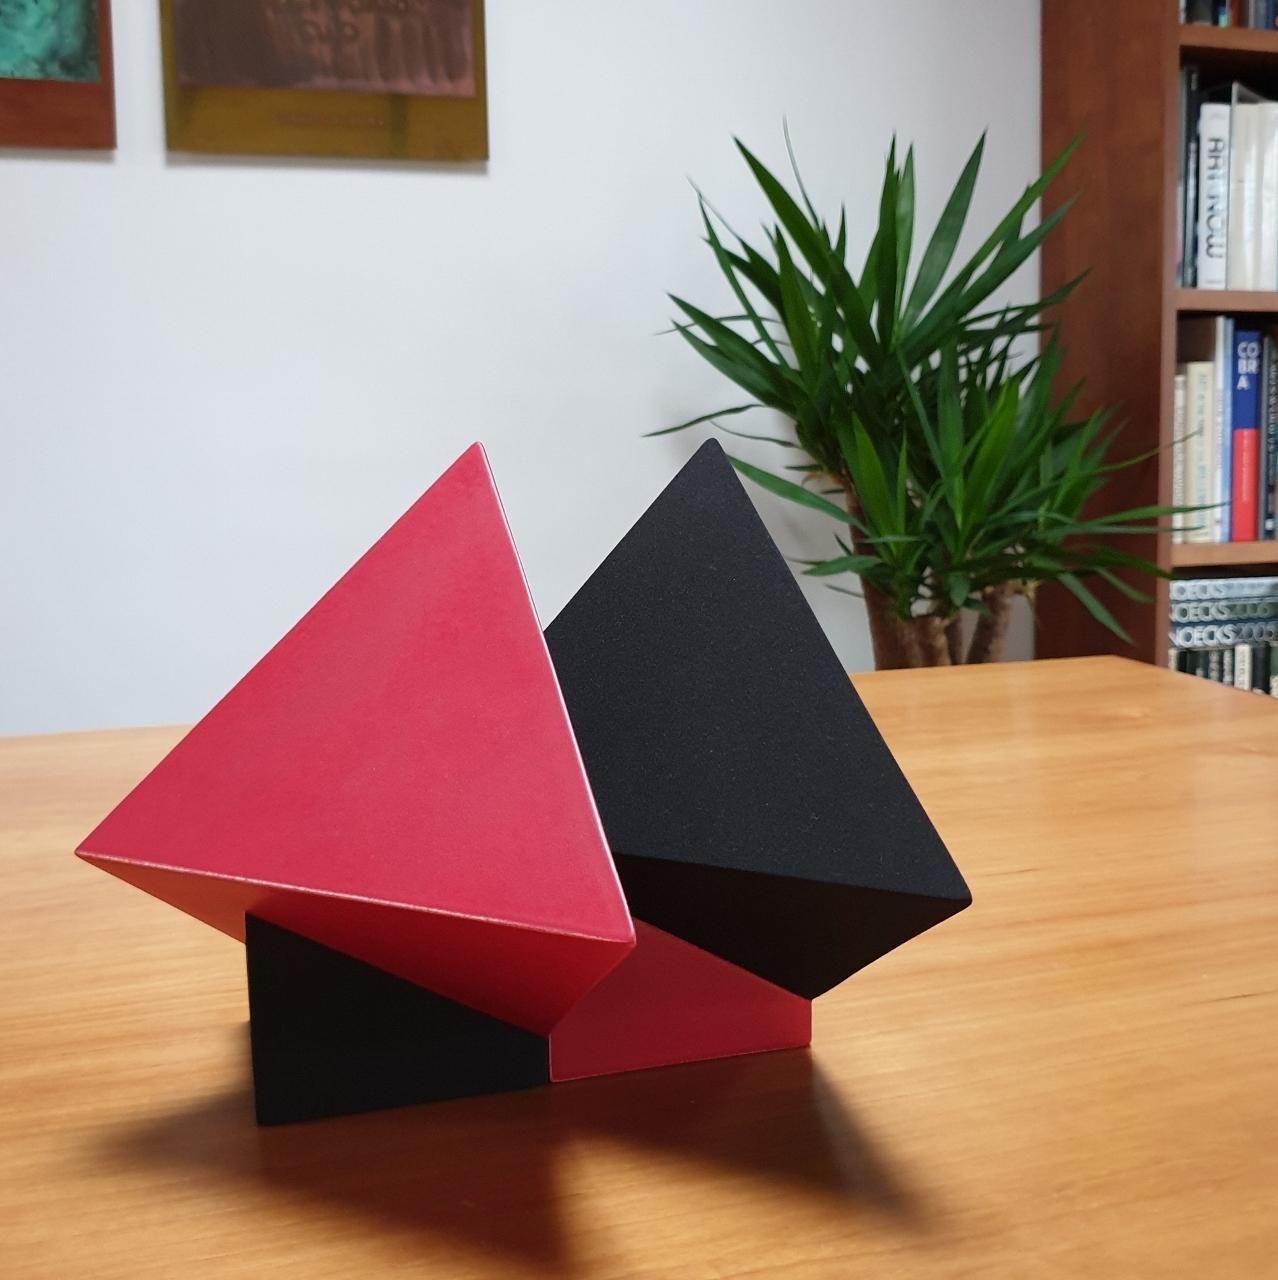 SC1502 red - contemporary modern abstract geometric ceramic object sculpture - Sculpture by Let de Kok